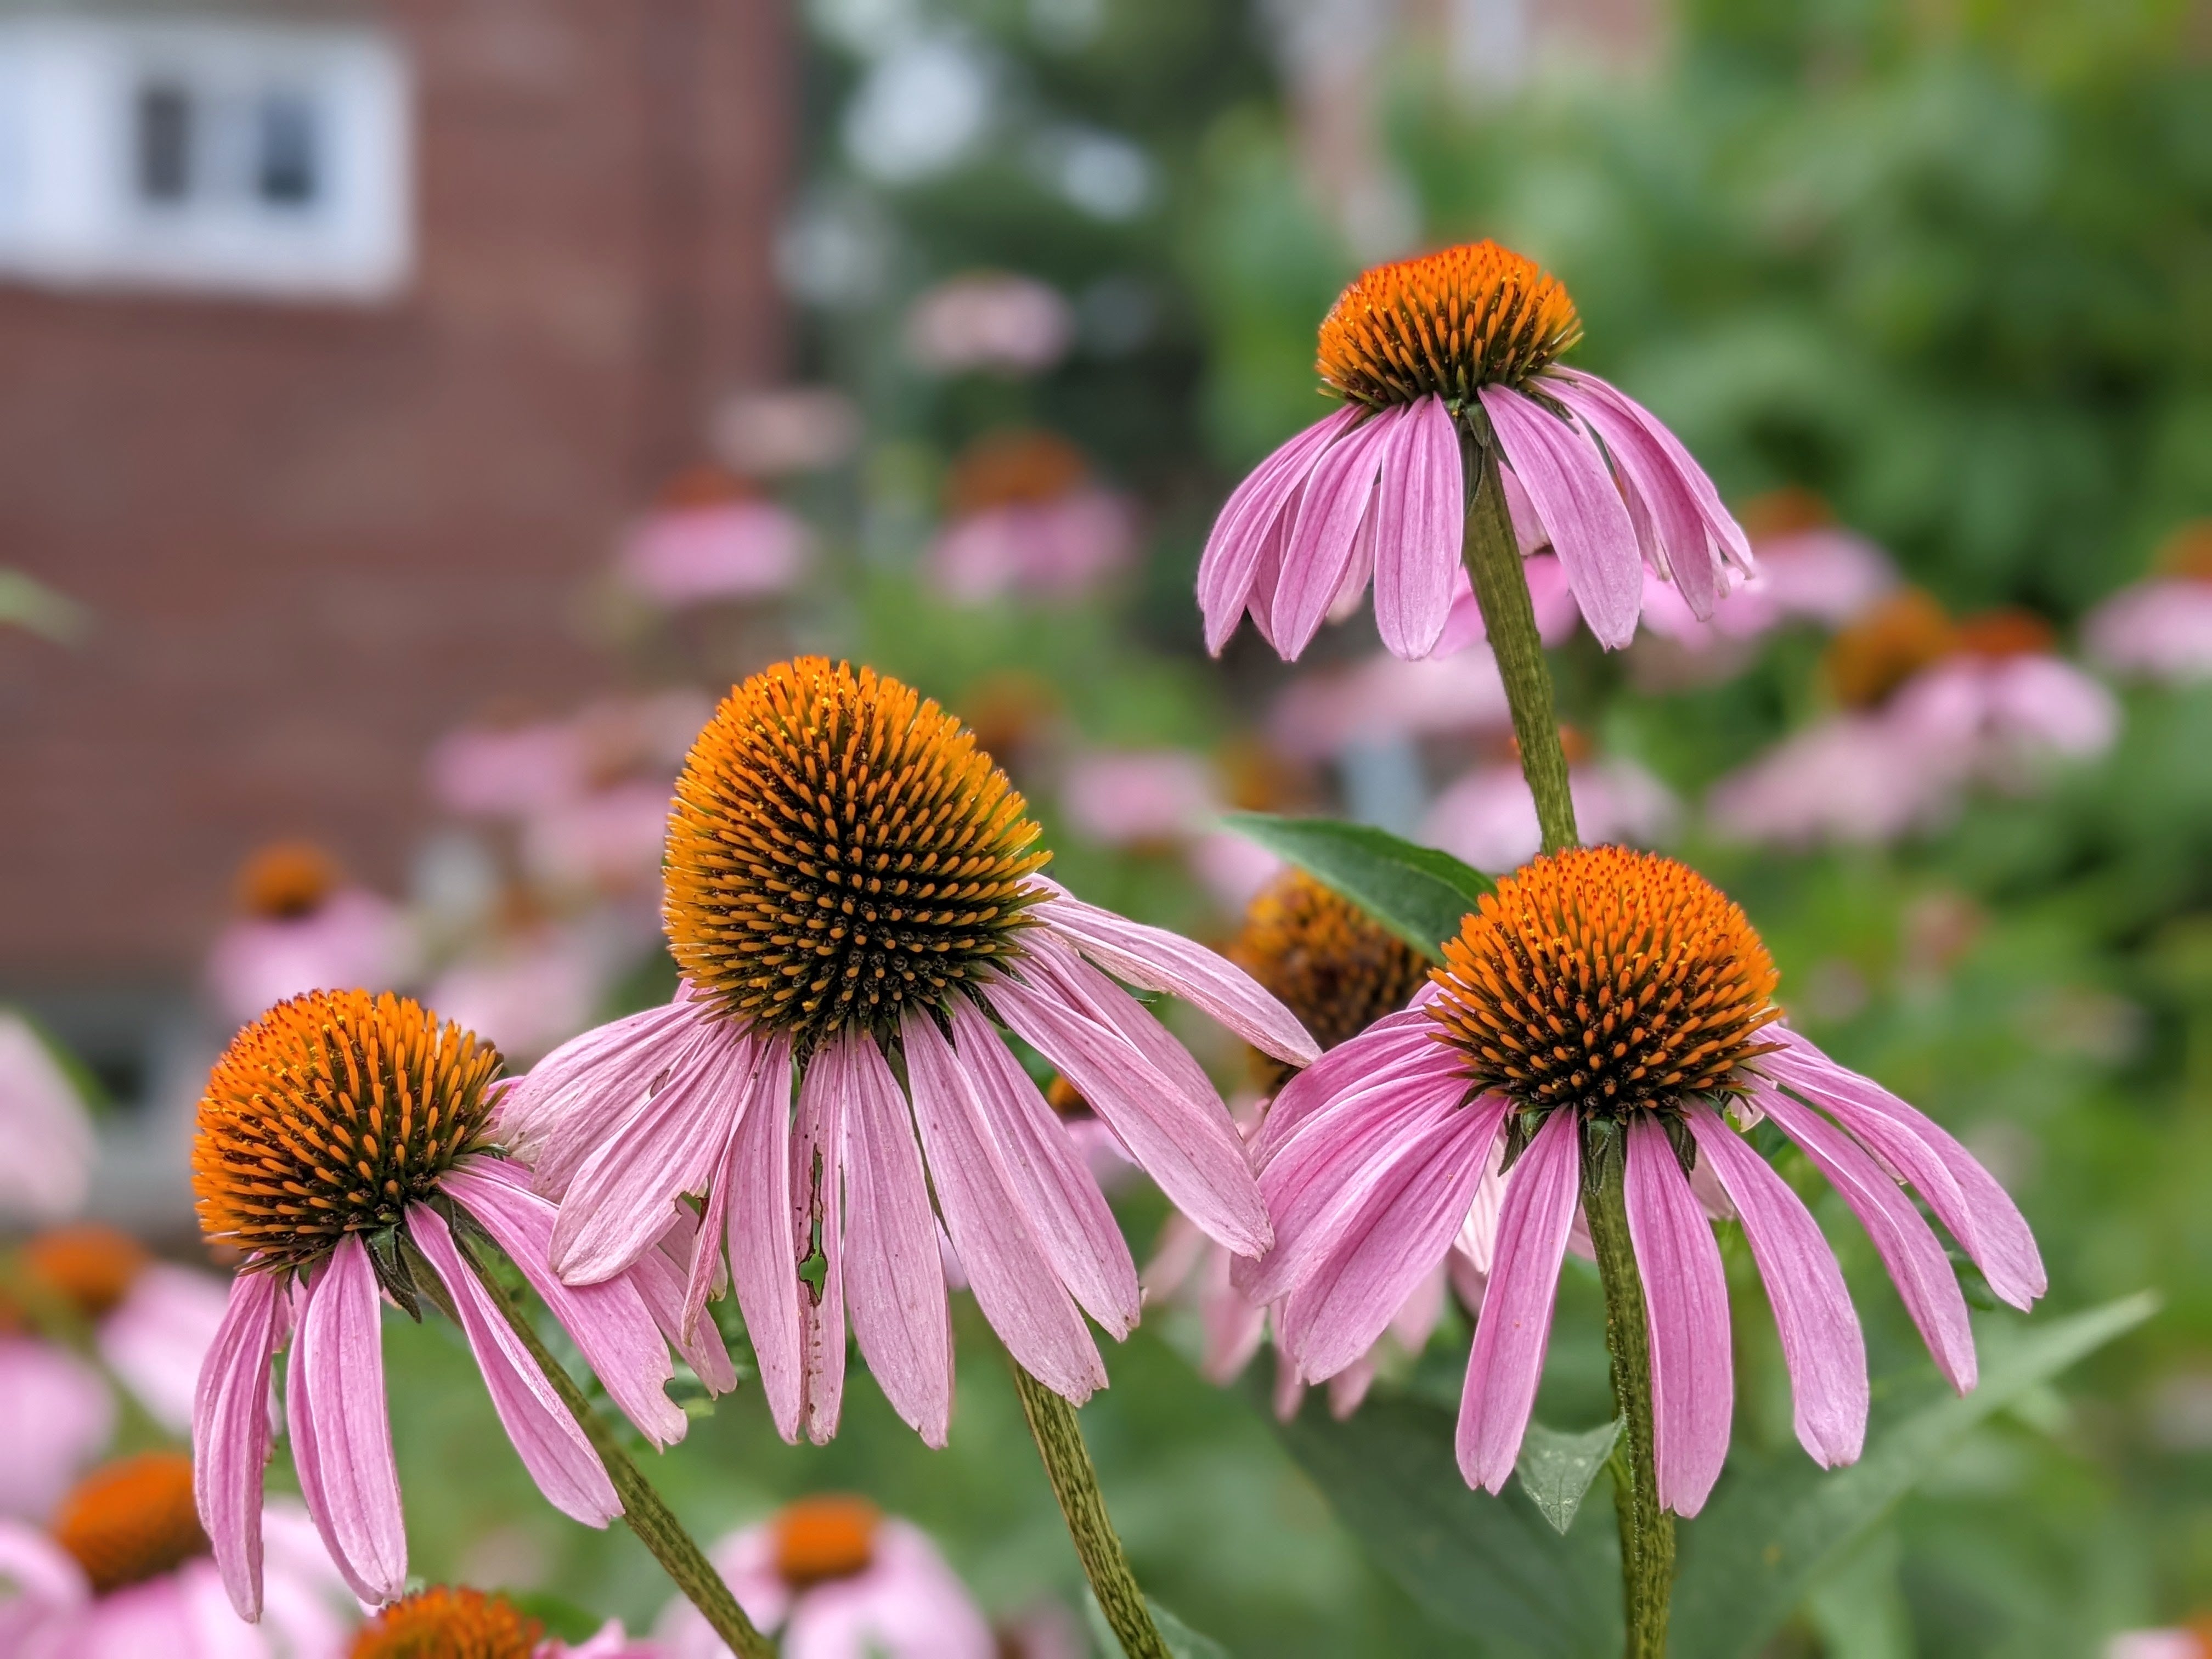 Tiny, but mighty forces of nature: Echinacea